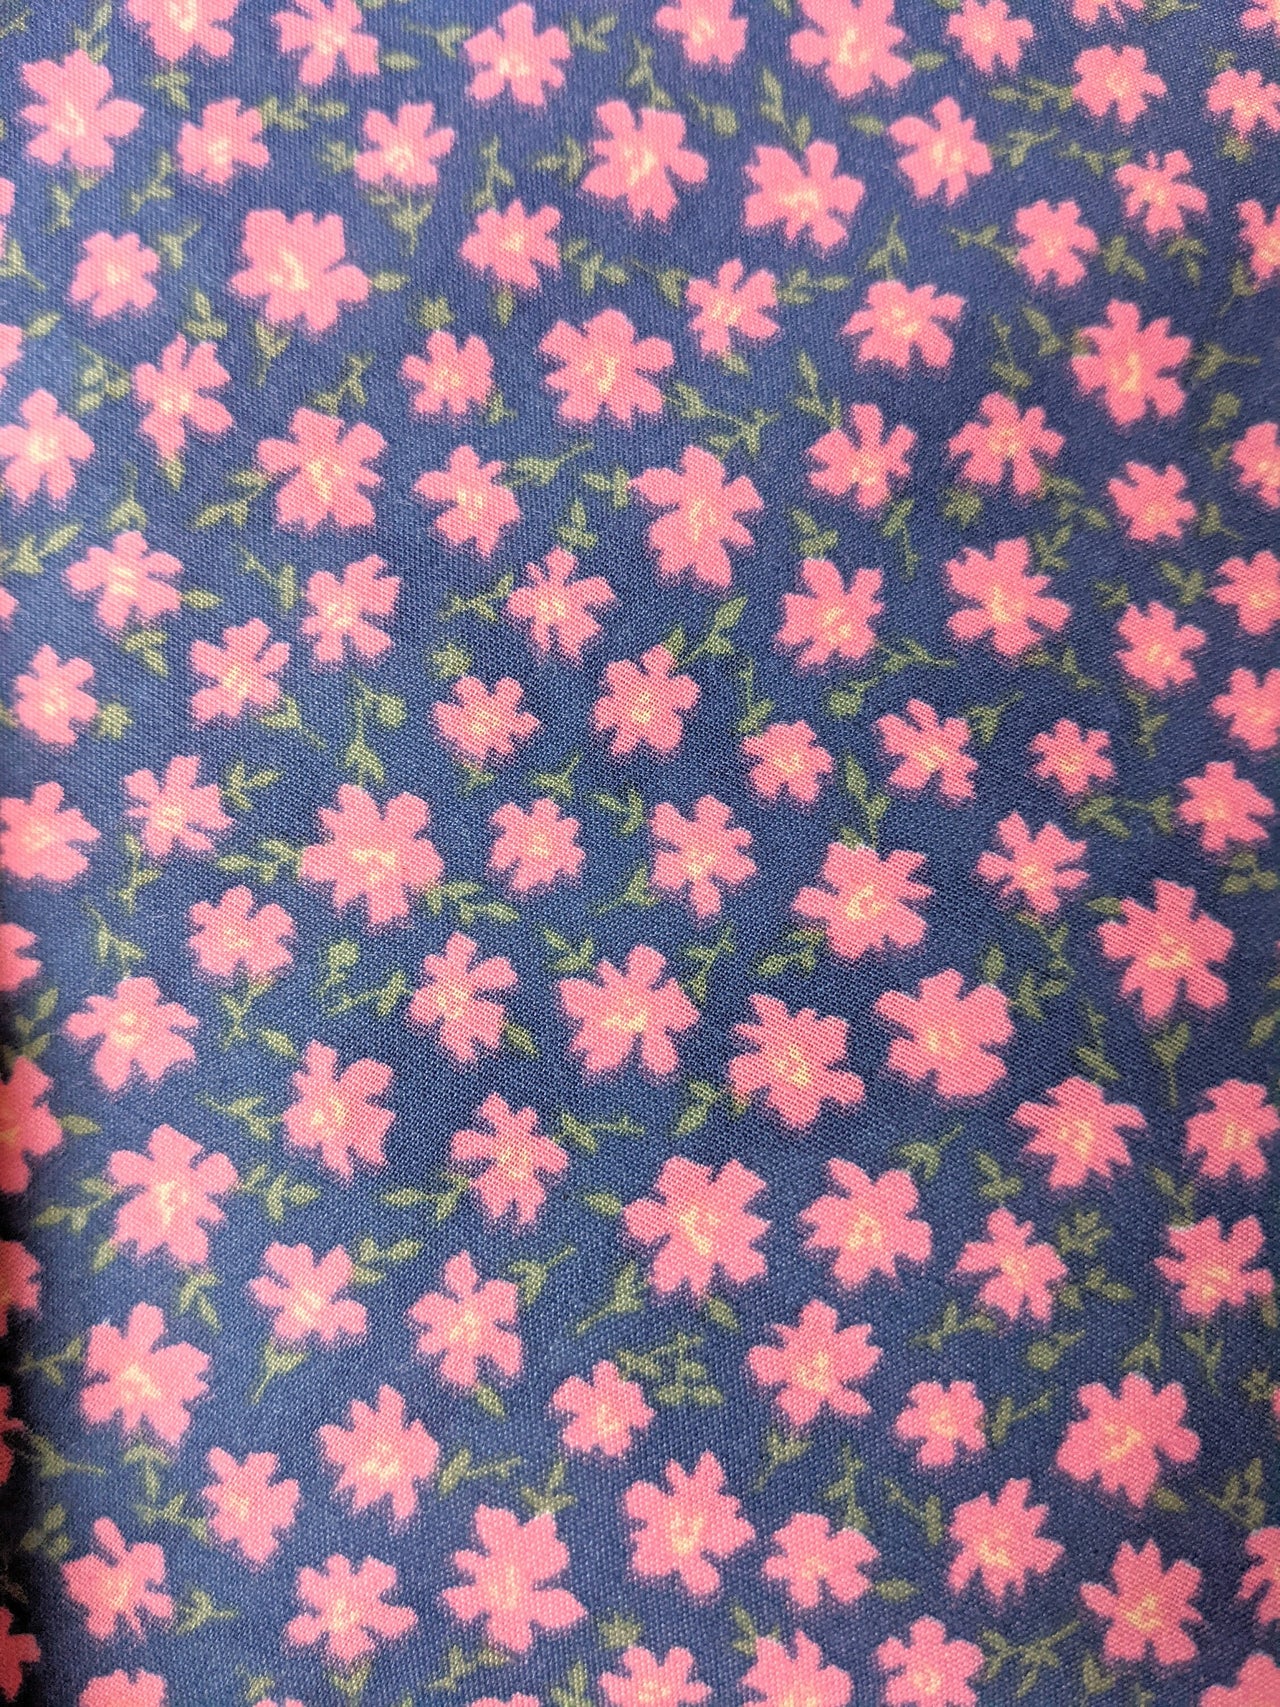 Blue Poly Cotton Fabric, Pink Flower Garden Fabric, Floral Fabric